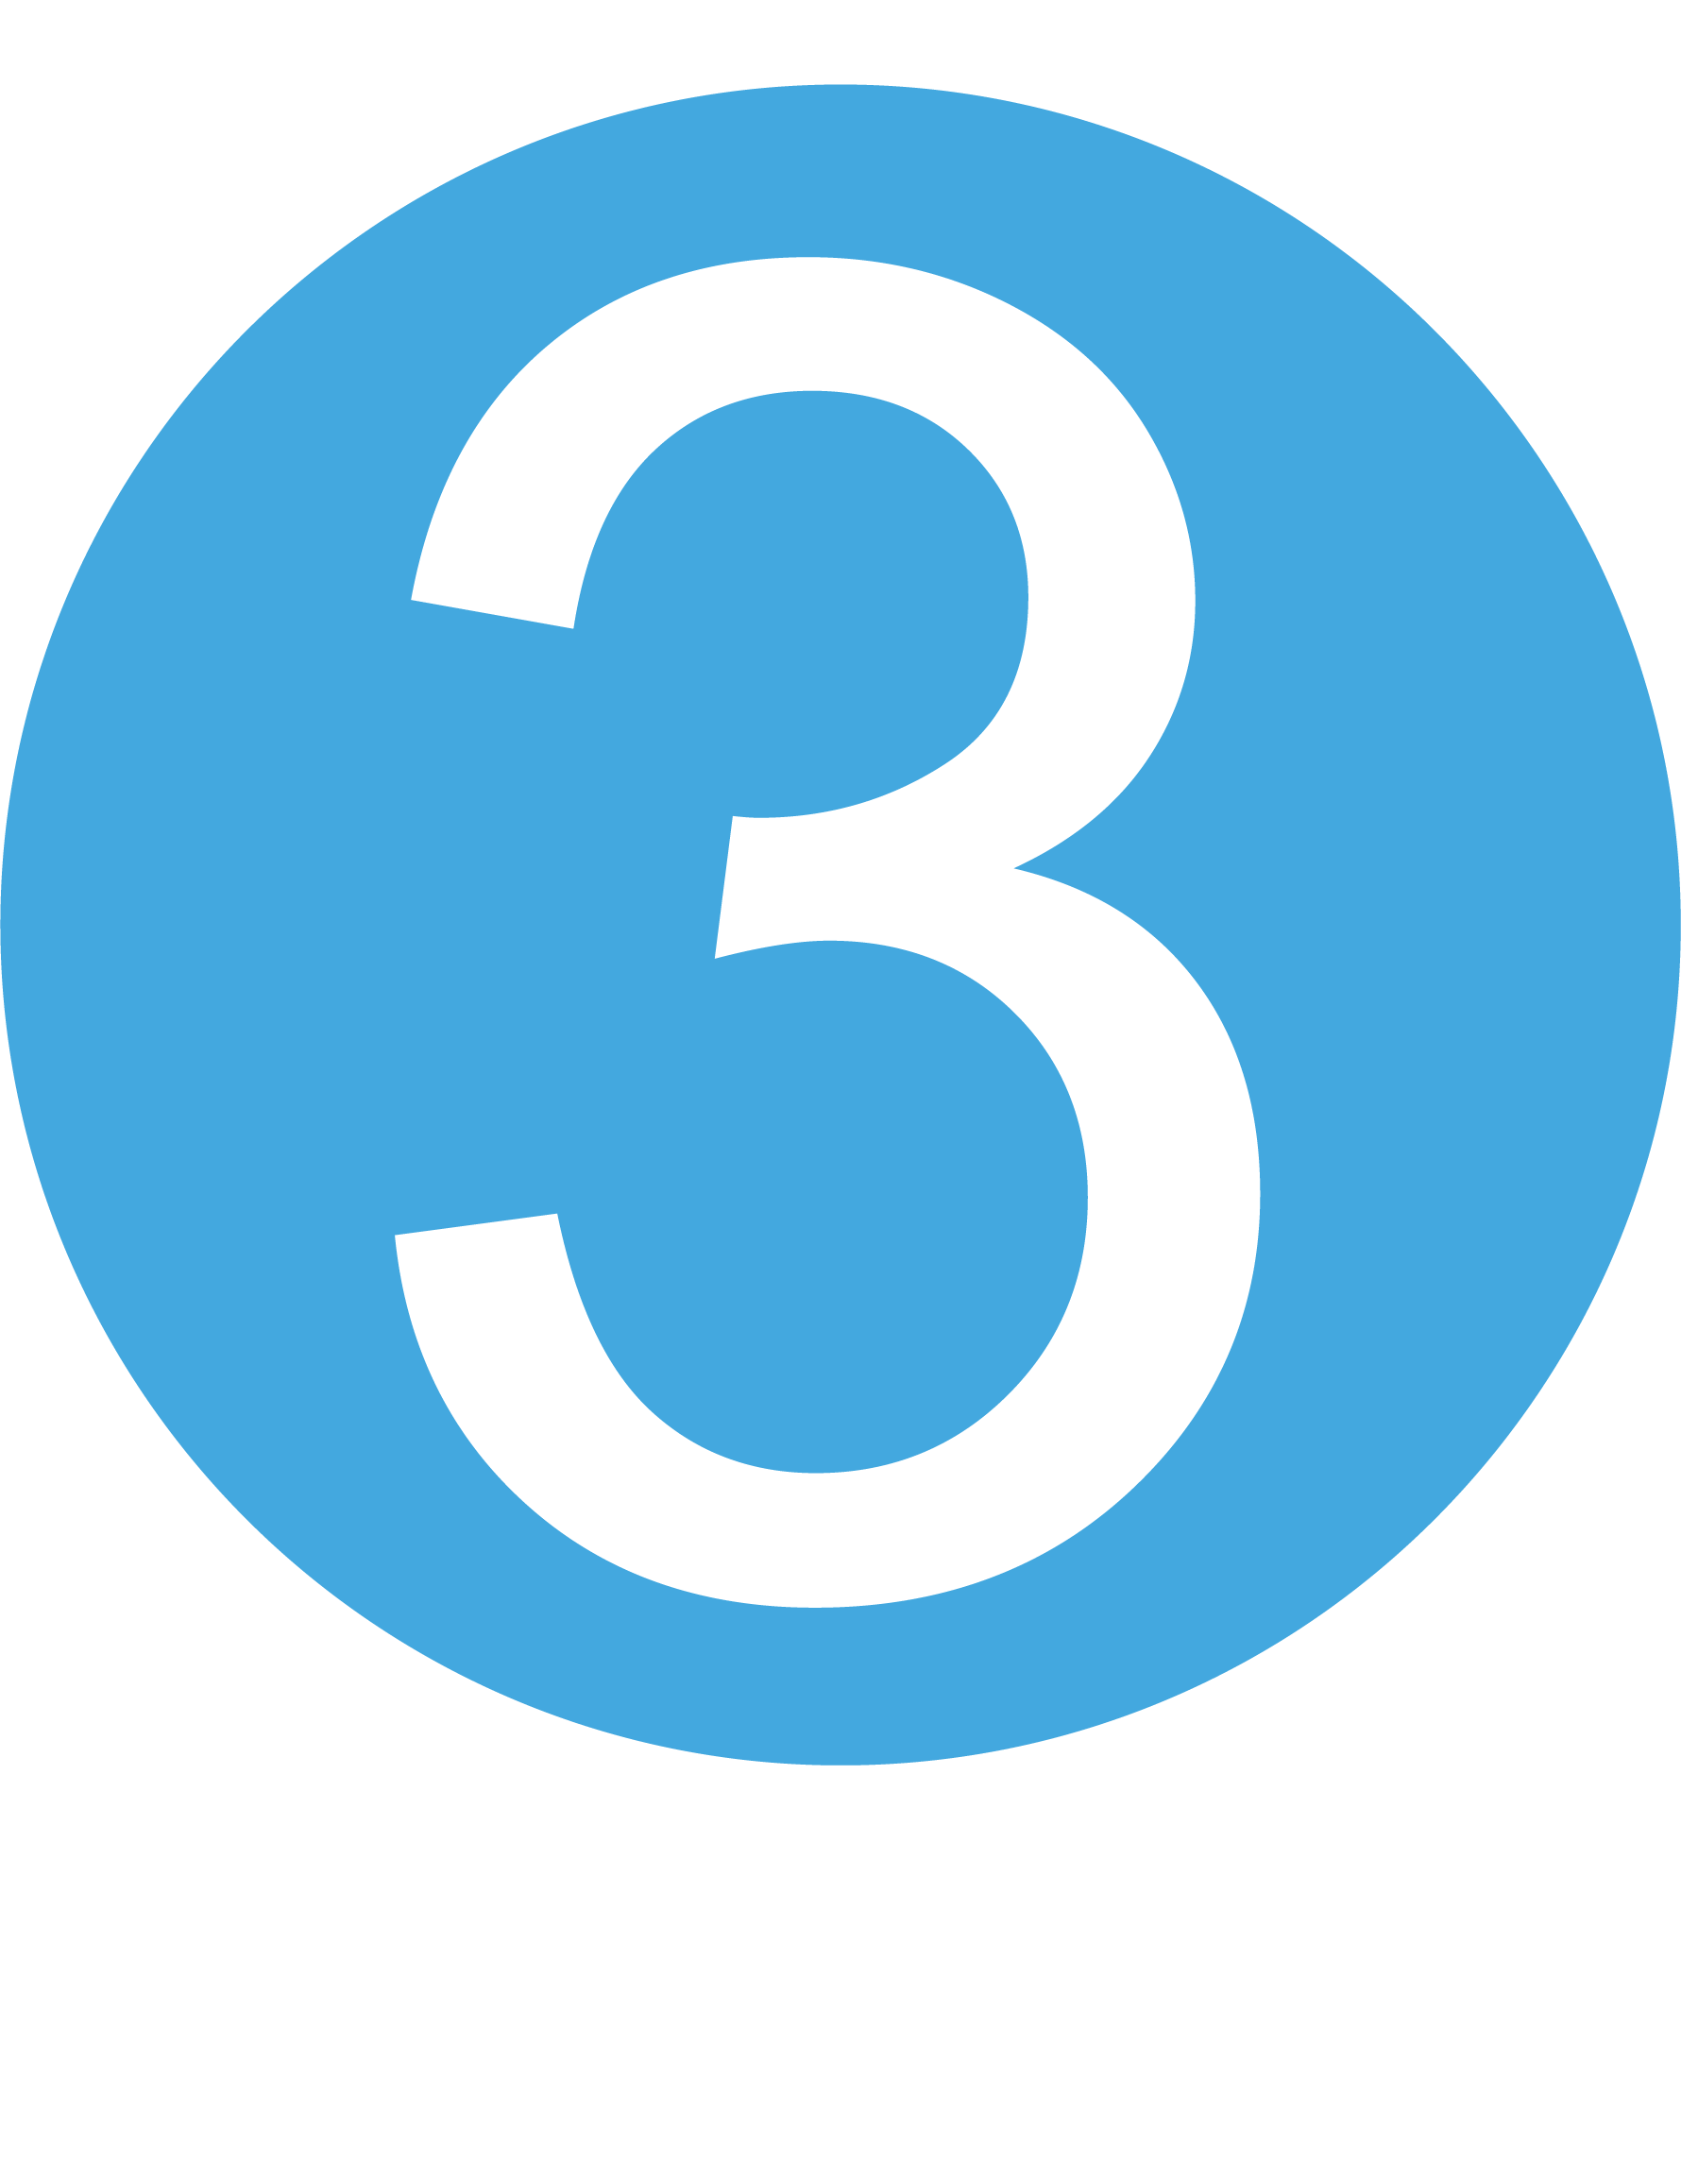 File:Eo circle blue number-3.svg - Wikimedia Commons